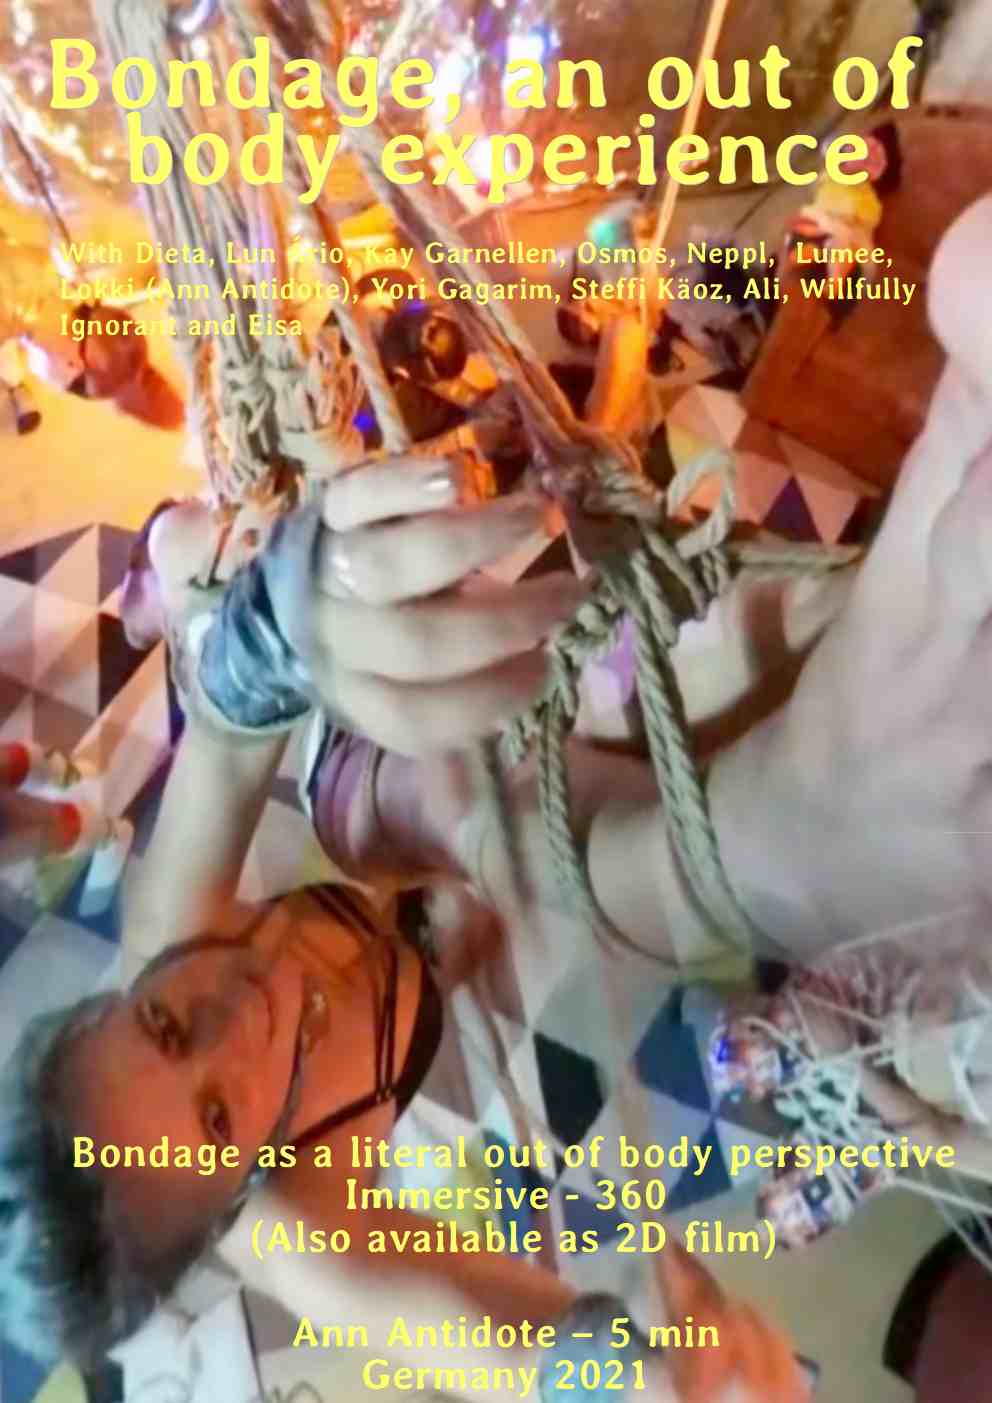 Antidote Poster to film Bondage, an out of body experience